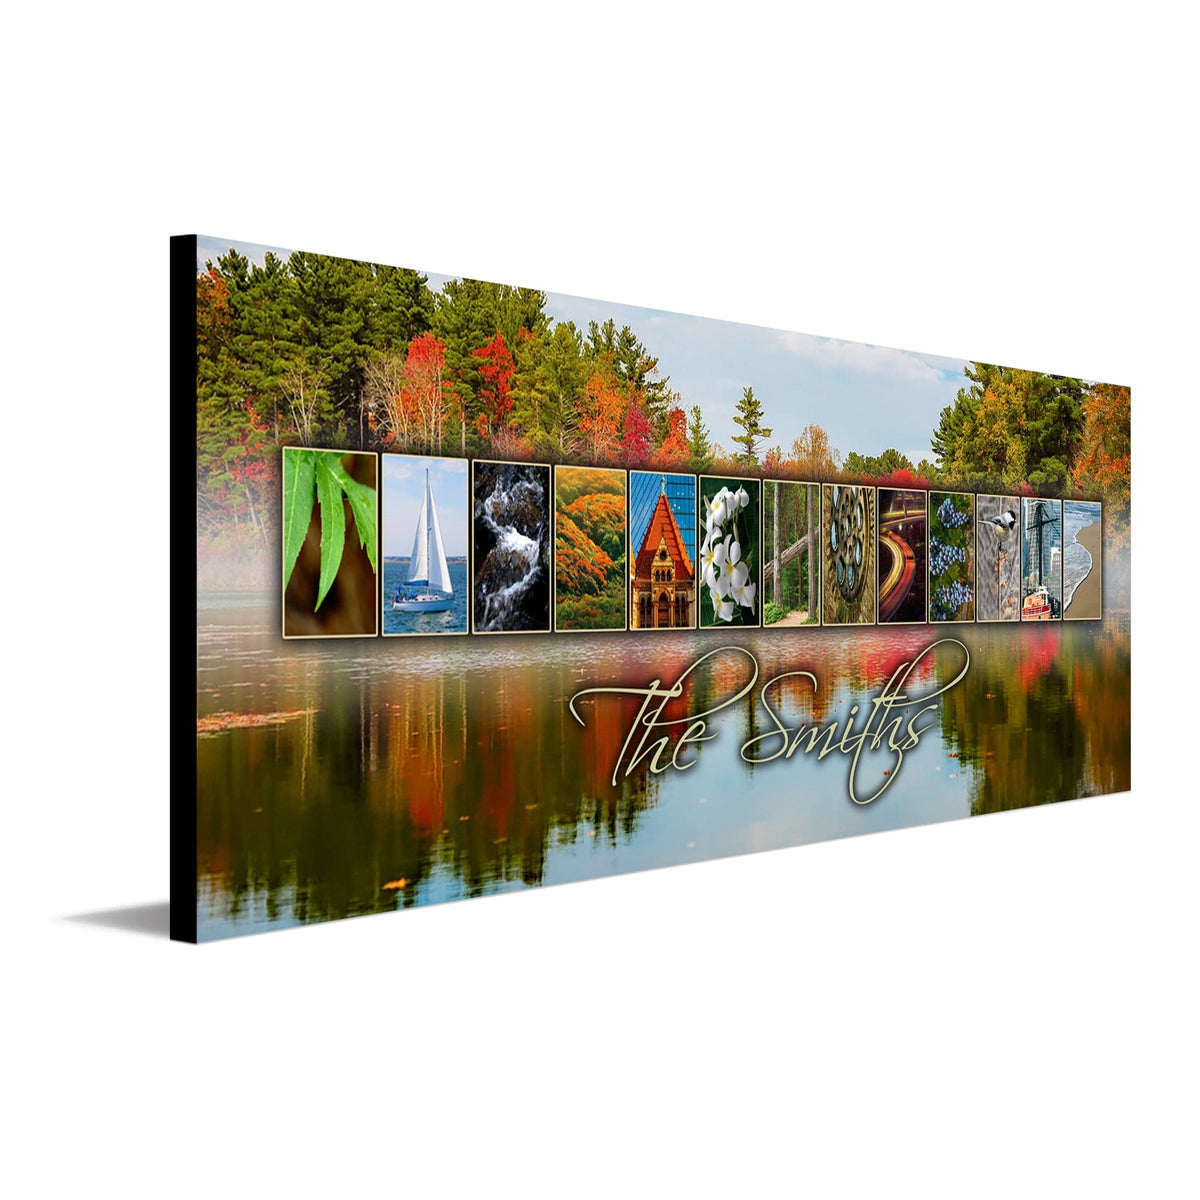 Massachusetts art that uses images from the around the state to spell the word Massachusetts - Personal-Prints